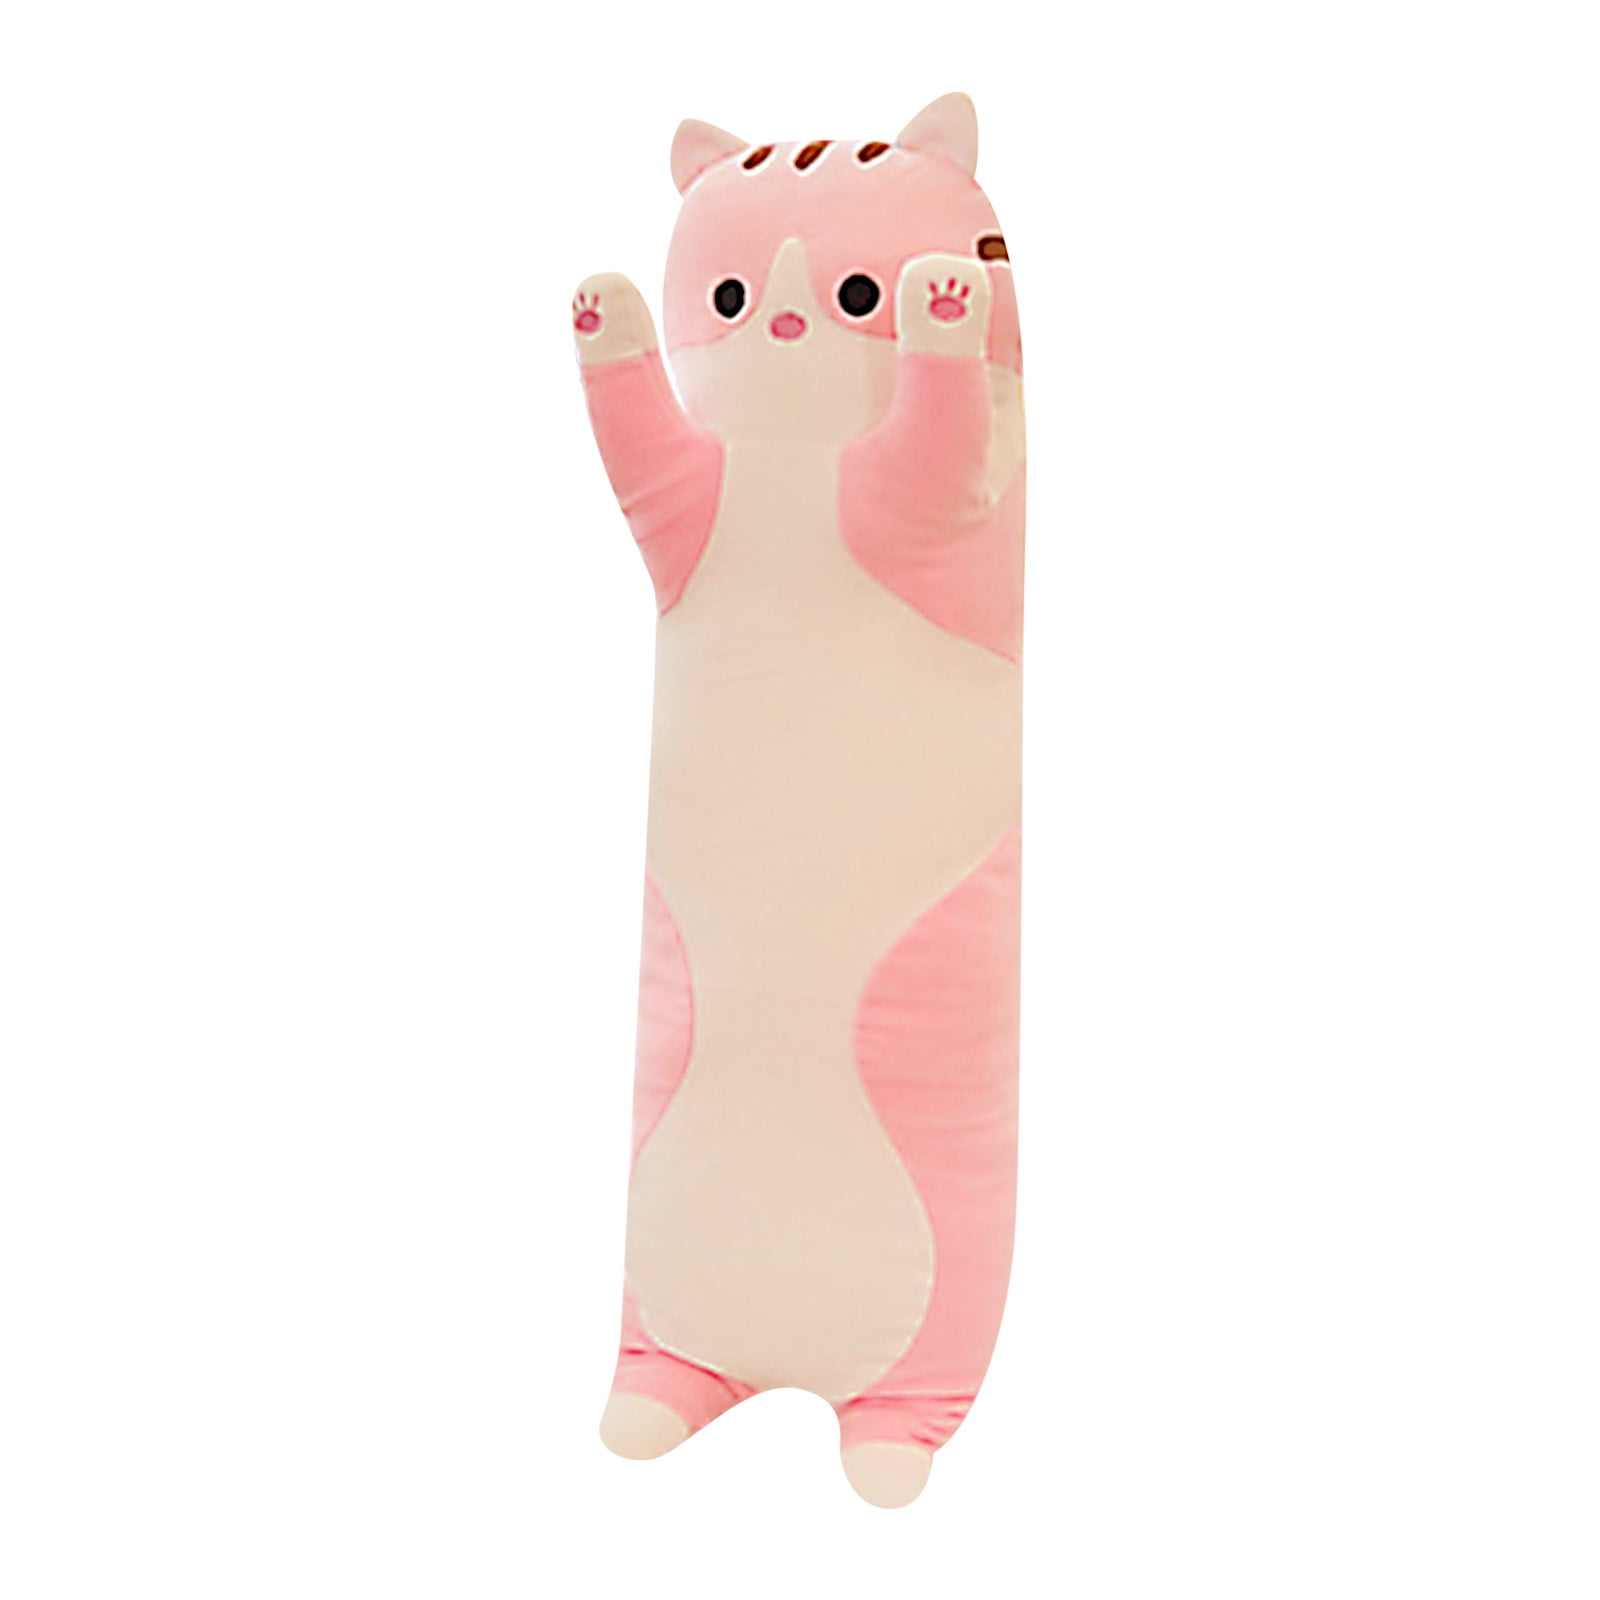 Doll Toy Gift for Childs Girlfriend Cute Plush cat Doll Soft Padded Pillow